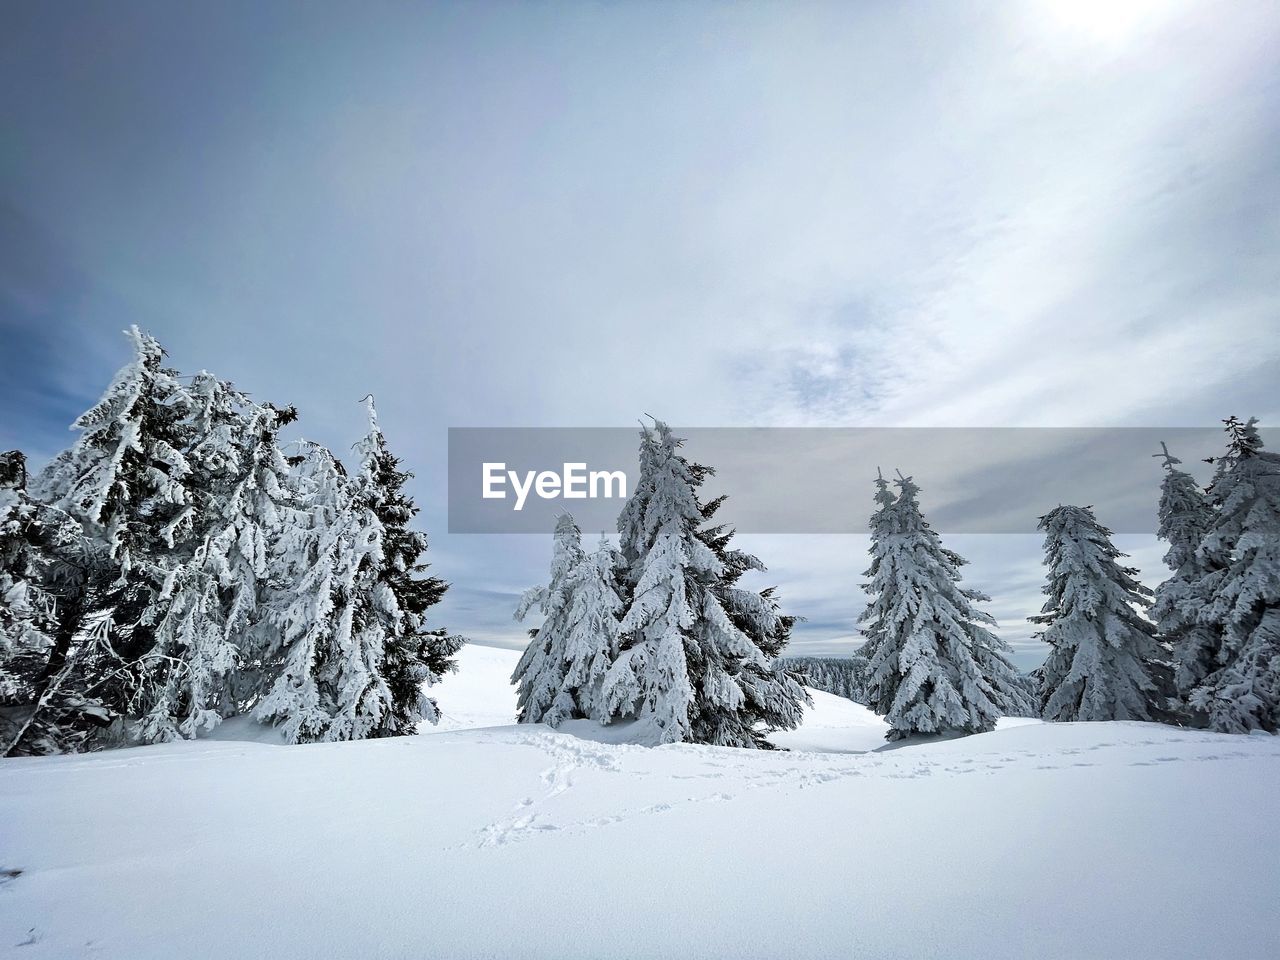 Forest of coniferous trees covered in snow